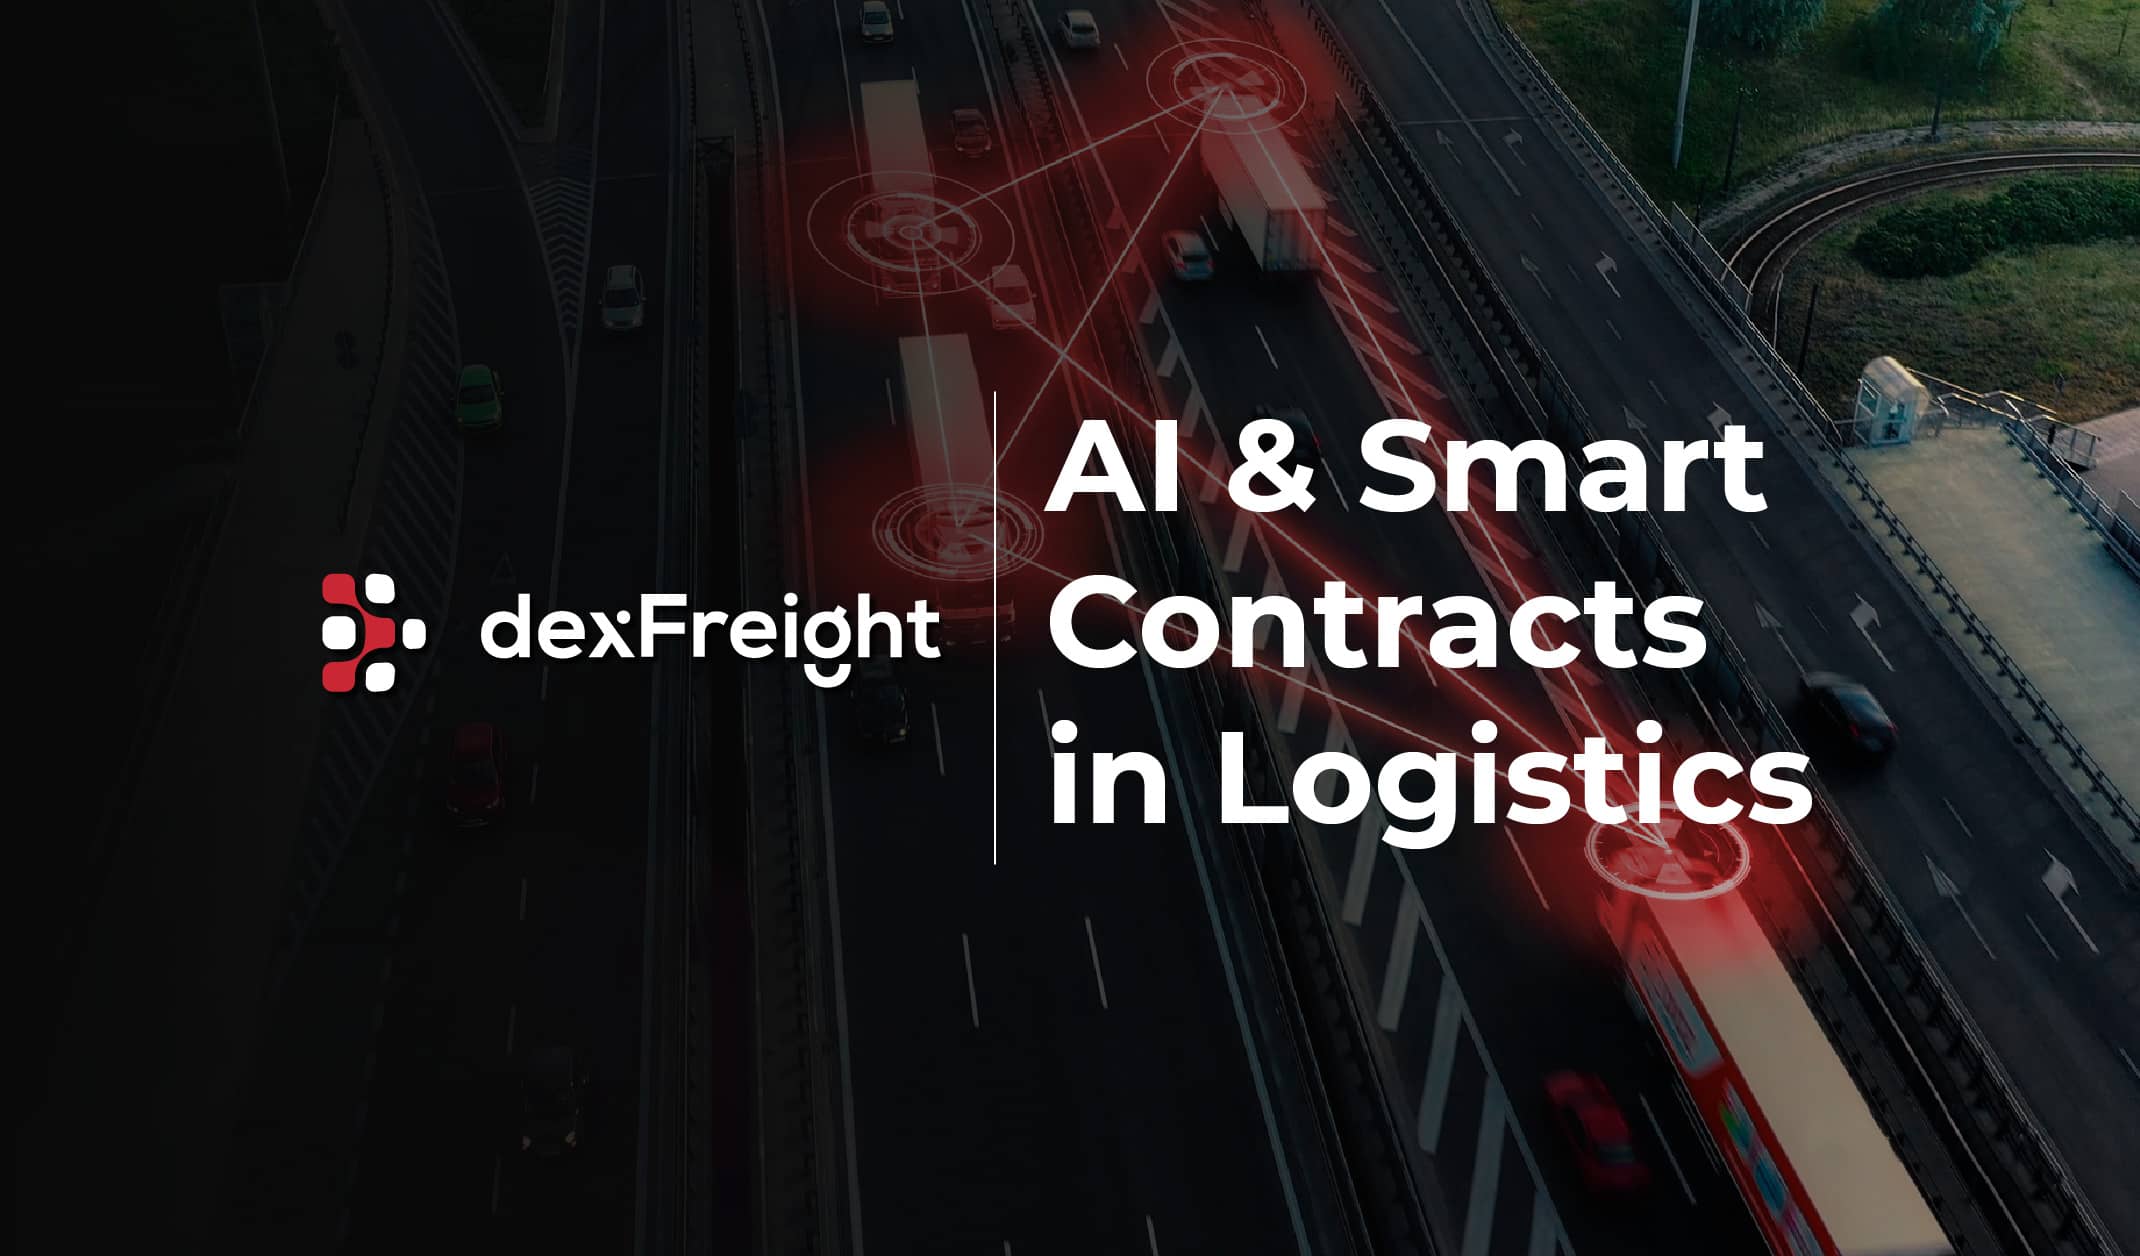 dexfreight al and